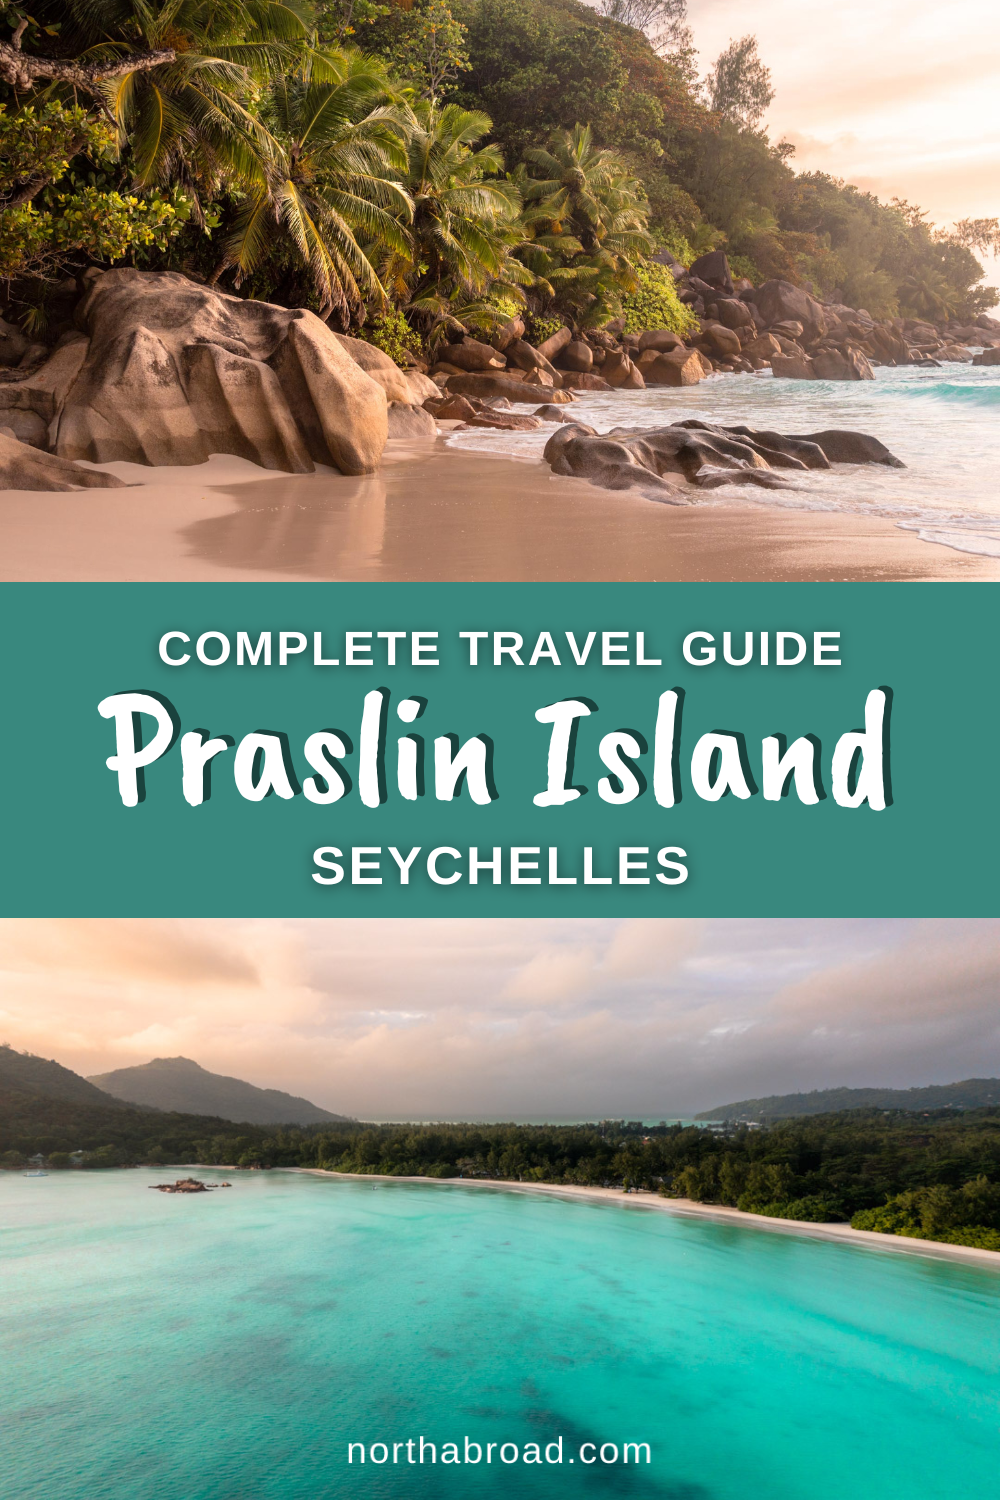 Praslin Island Travel Guide: 11 Best Beaches & Things To Do